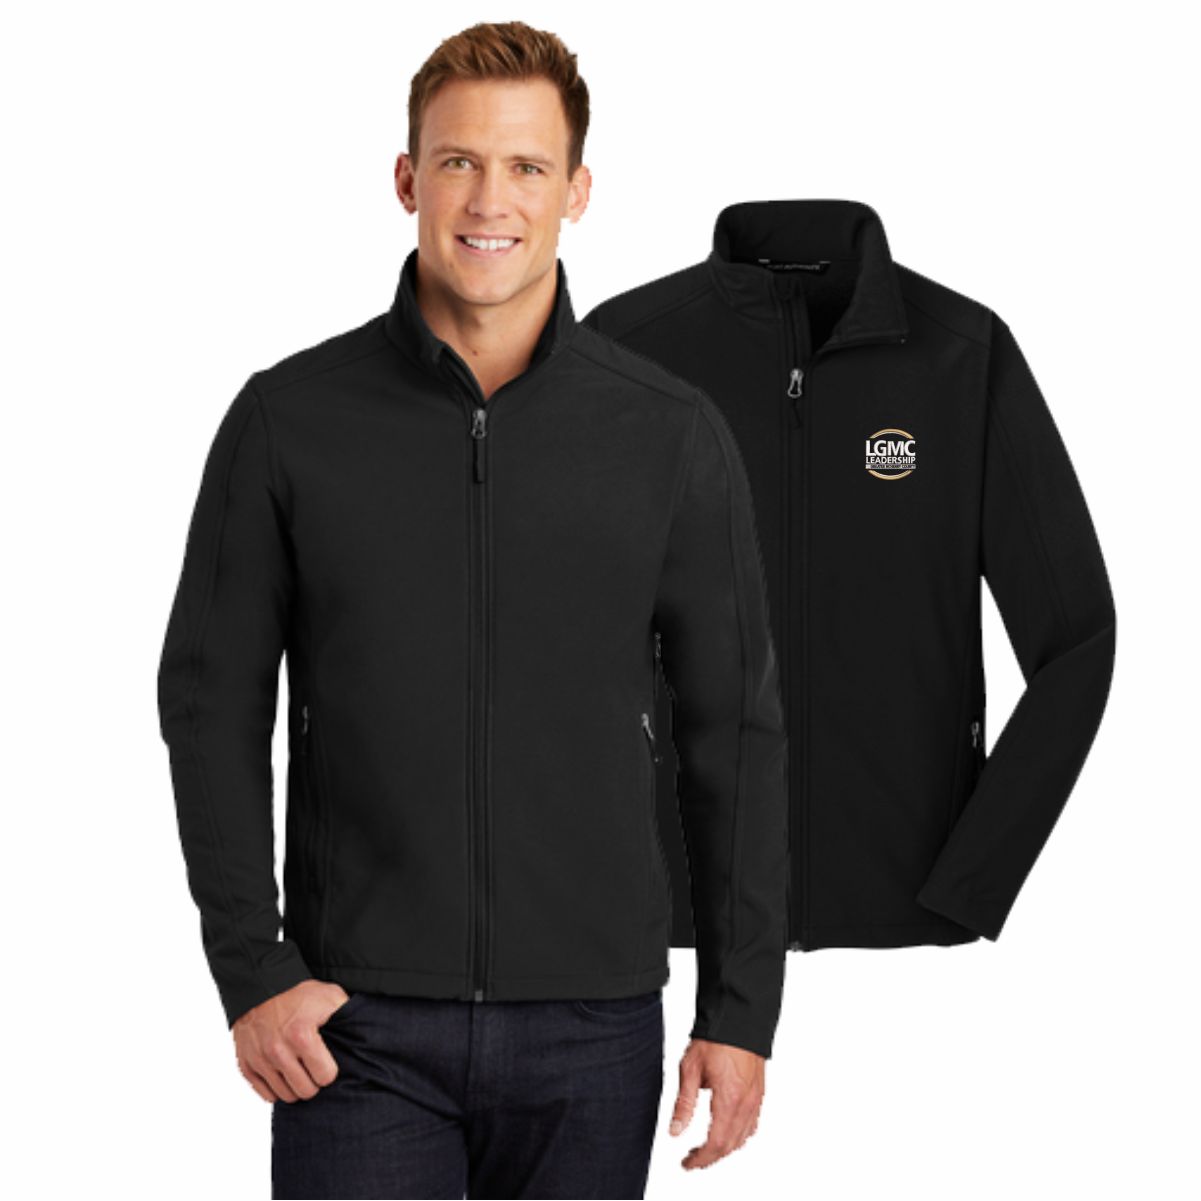 Leadership Greater McHenry County Core Soft Shell Jacket | HyperStitch, Inc